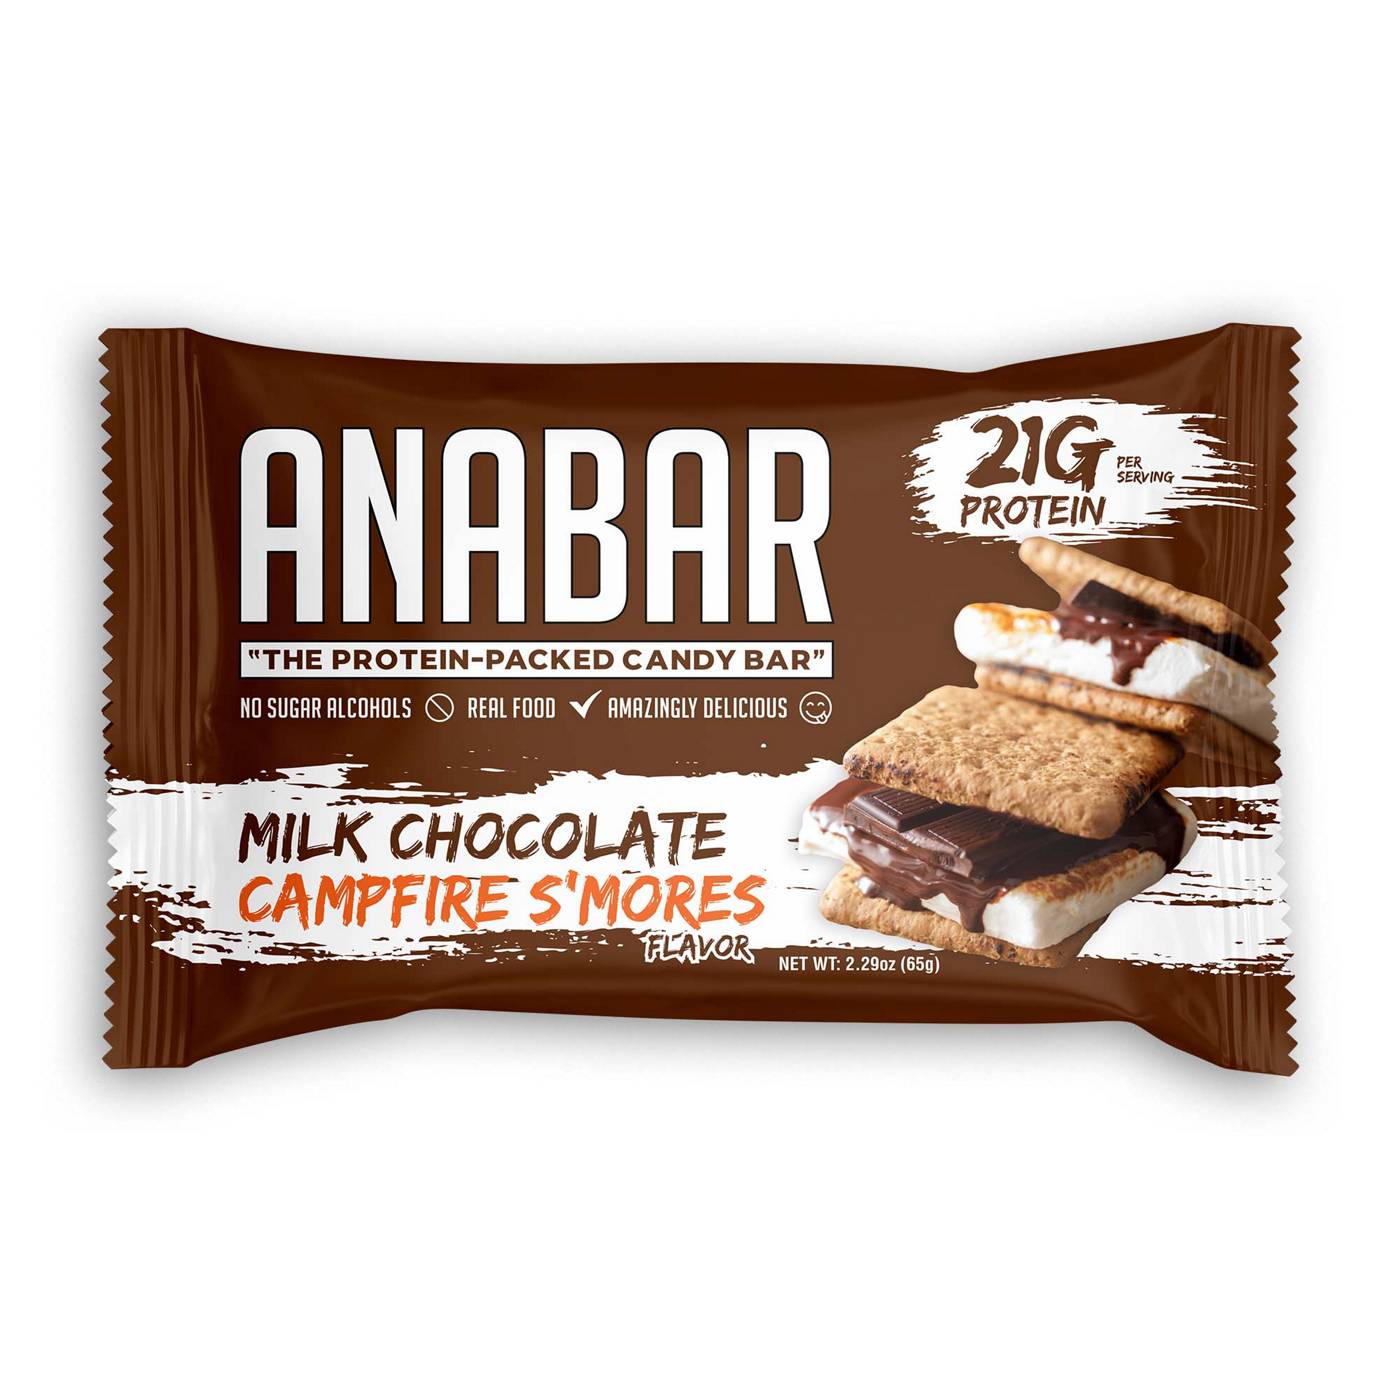 Anabar 21g Protein Performance Bar - Milk Chocolate Campfire S'mores; image 1 of 2